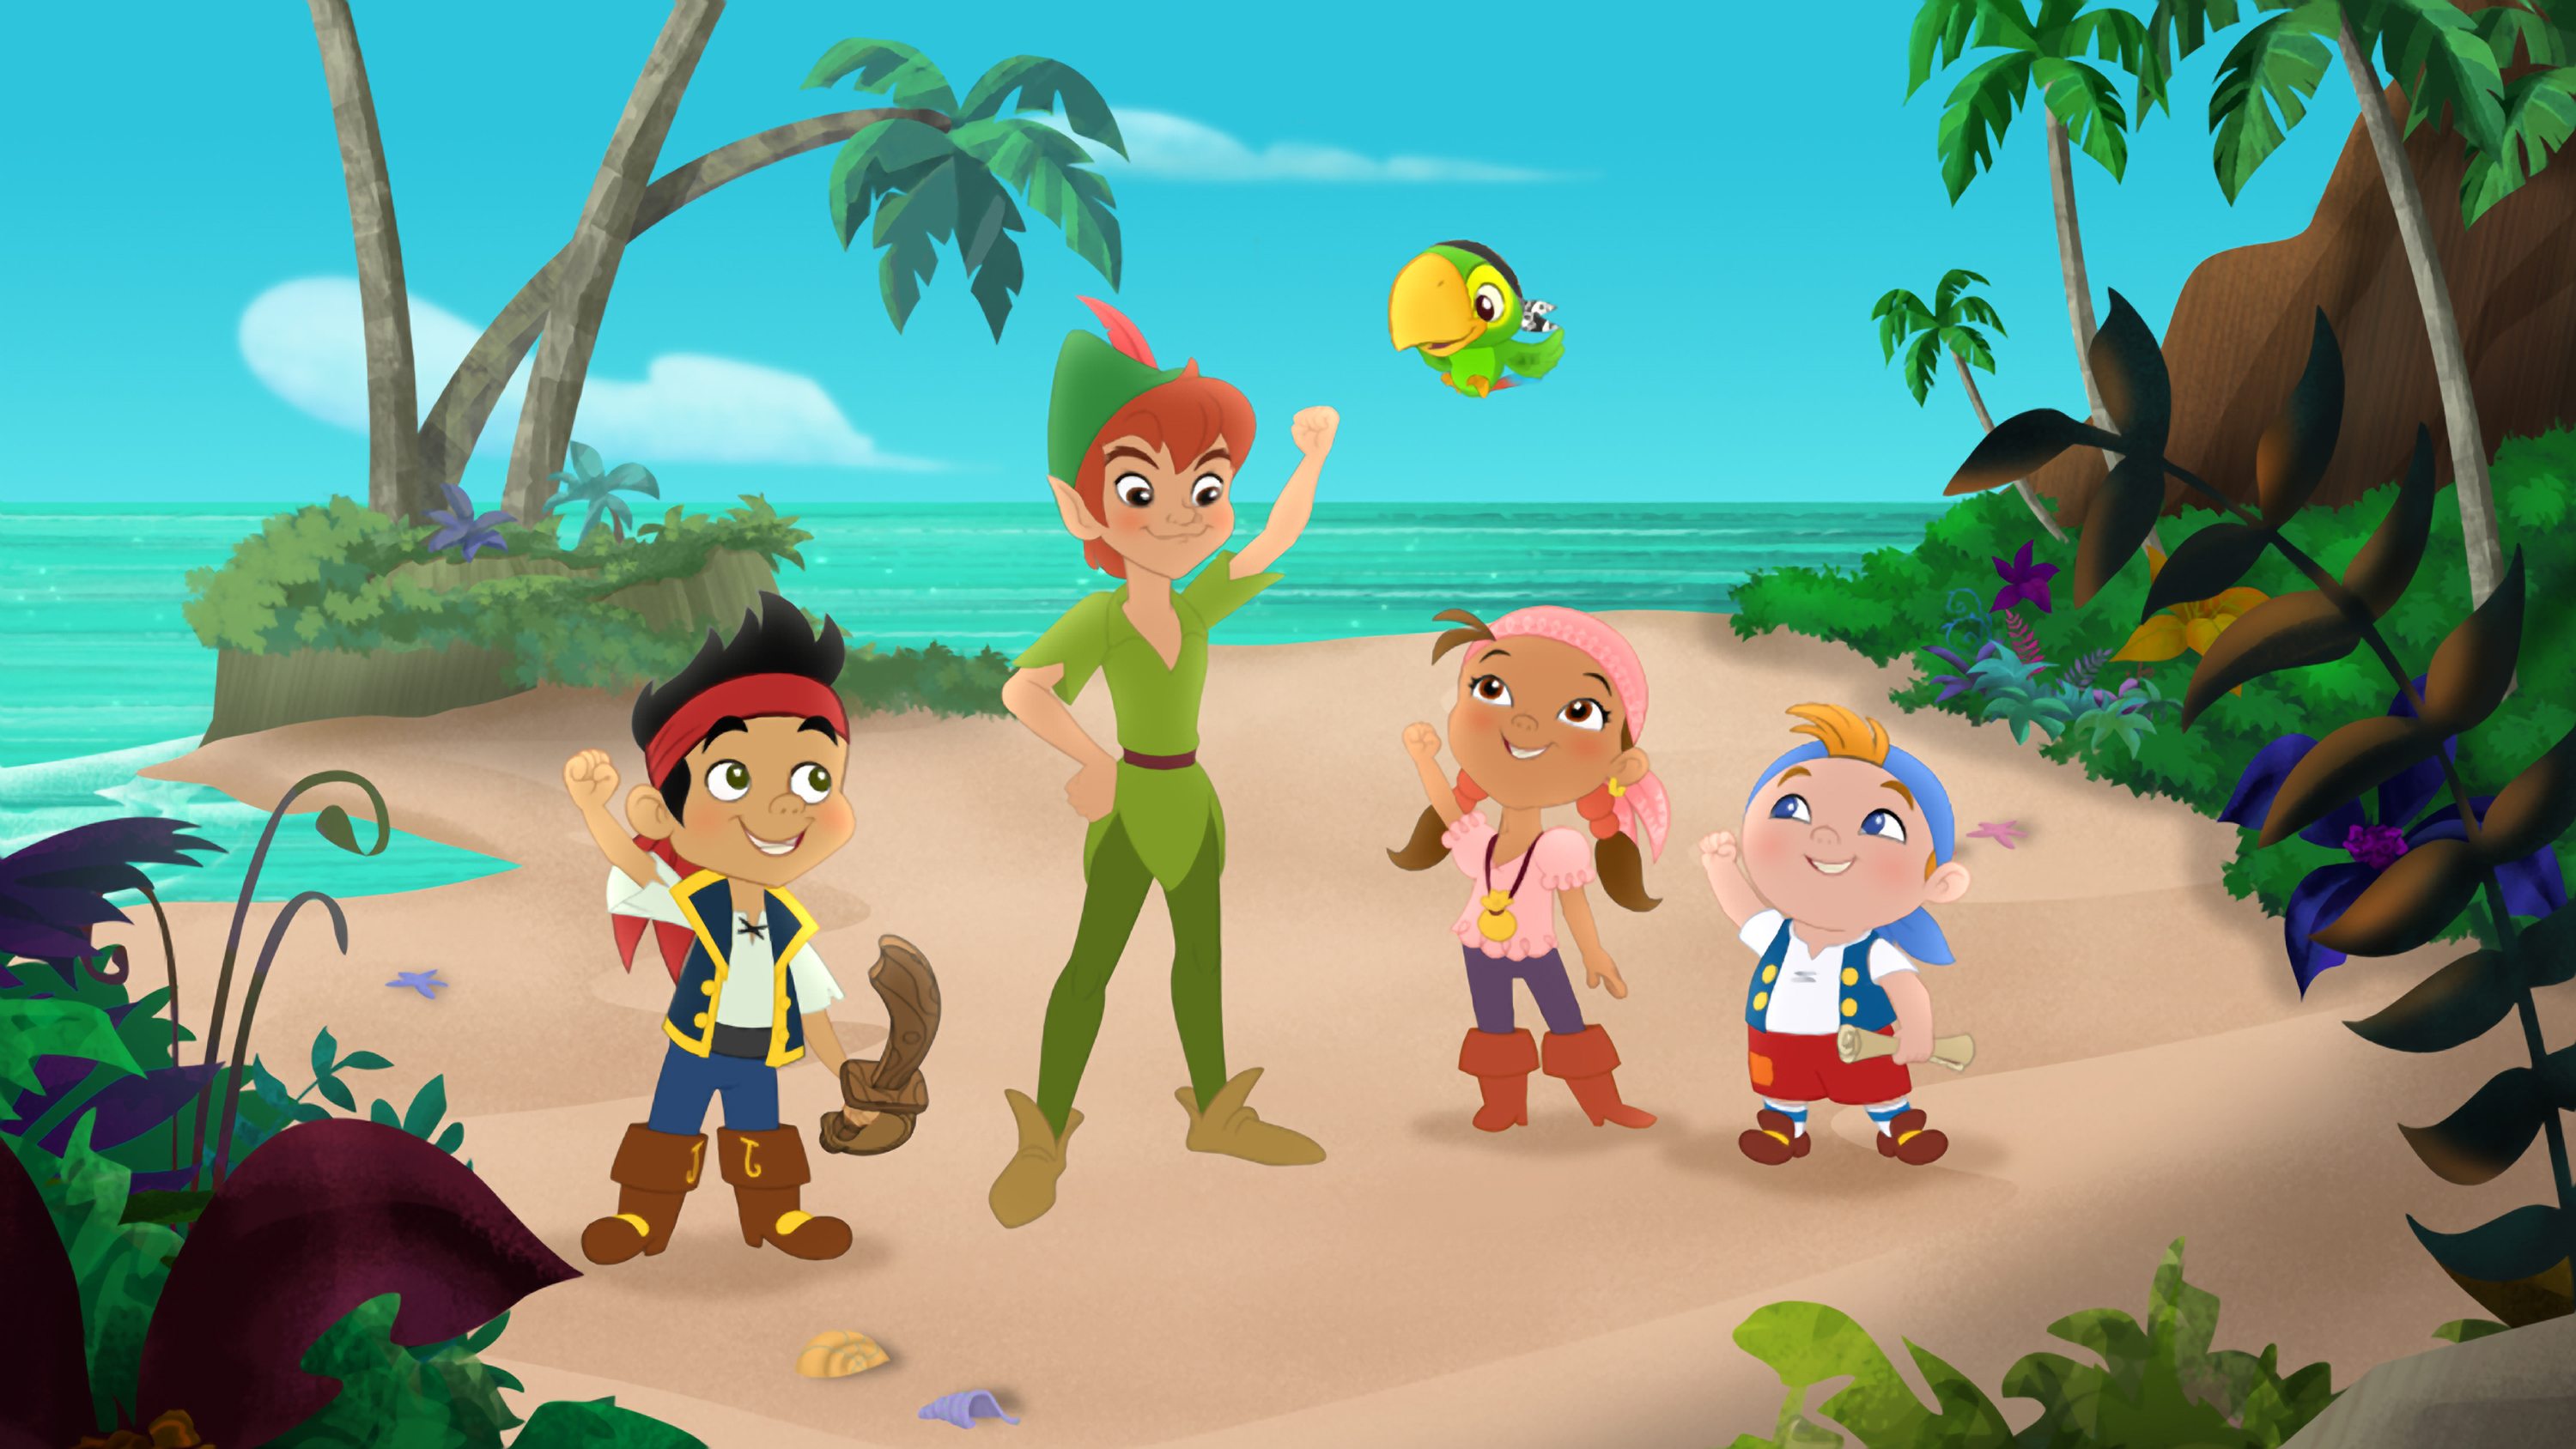 Disney Jake and the Never Land Pirates